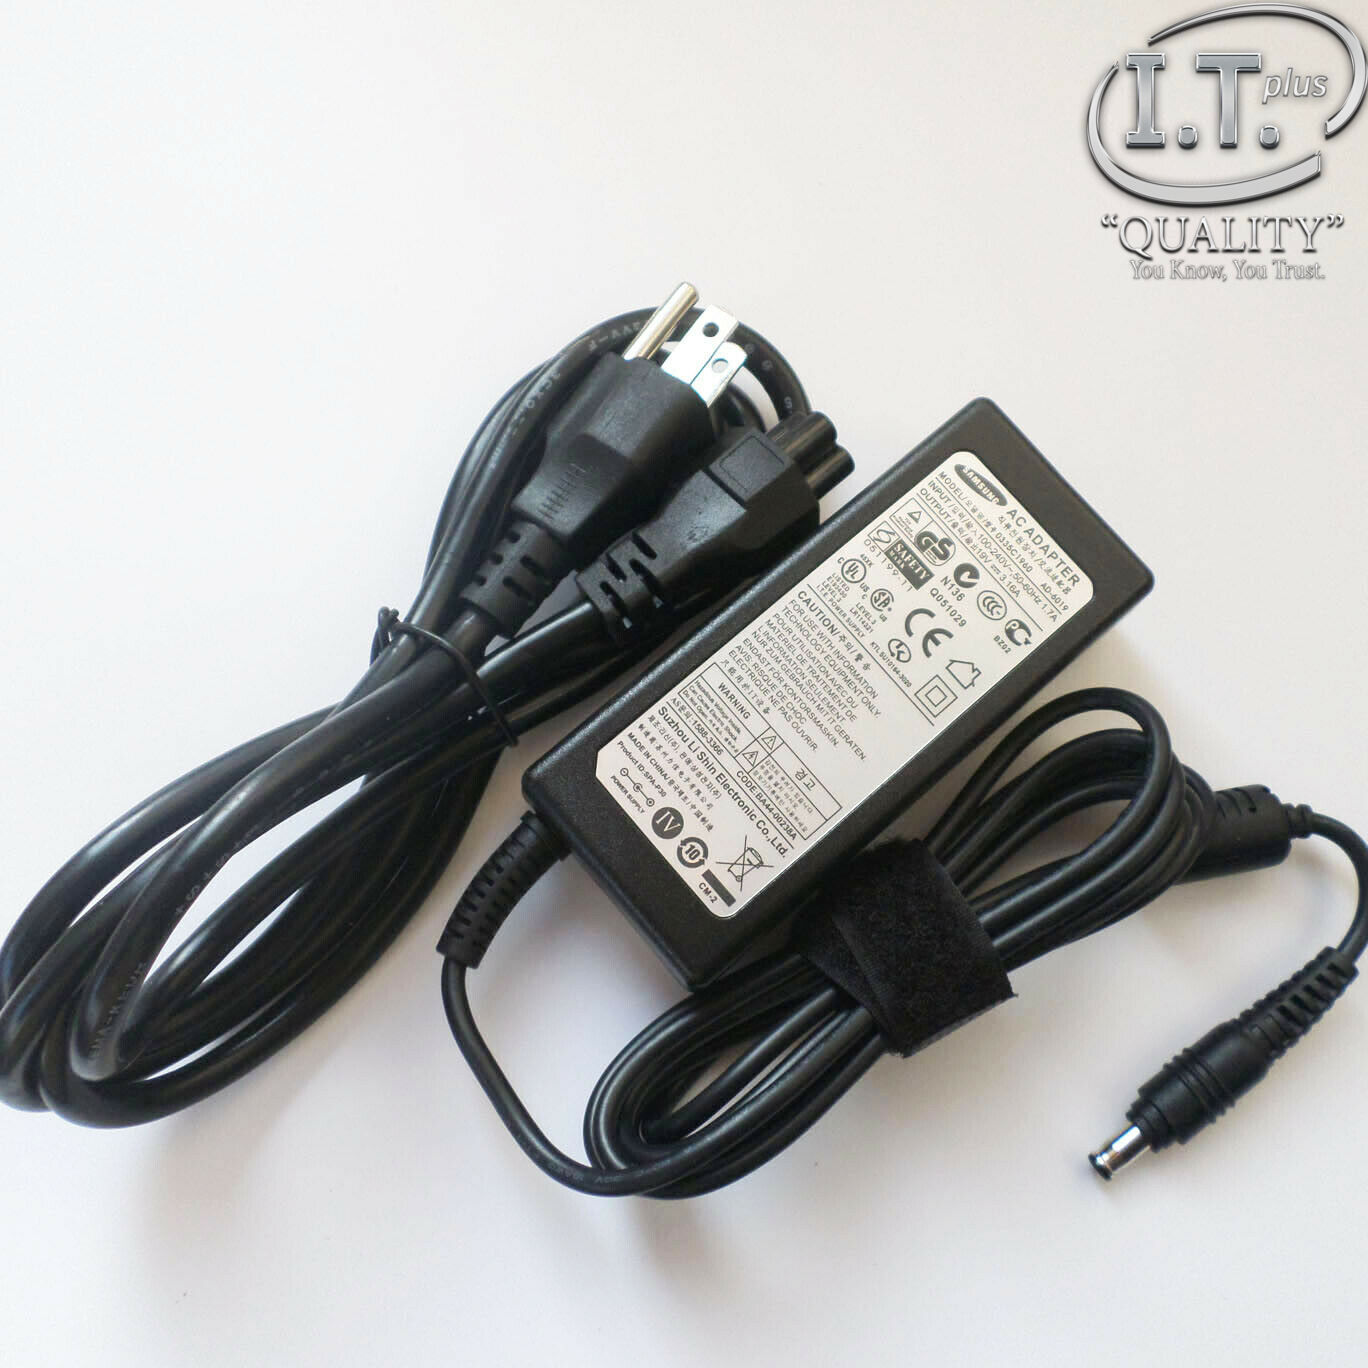 Samsung Large Pin Laptop Charger (D-6019R AD-9019 AA-PA0N90W) For Sale In Trinidad